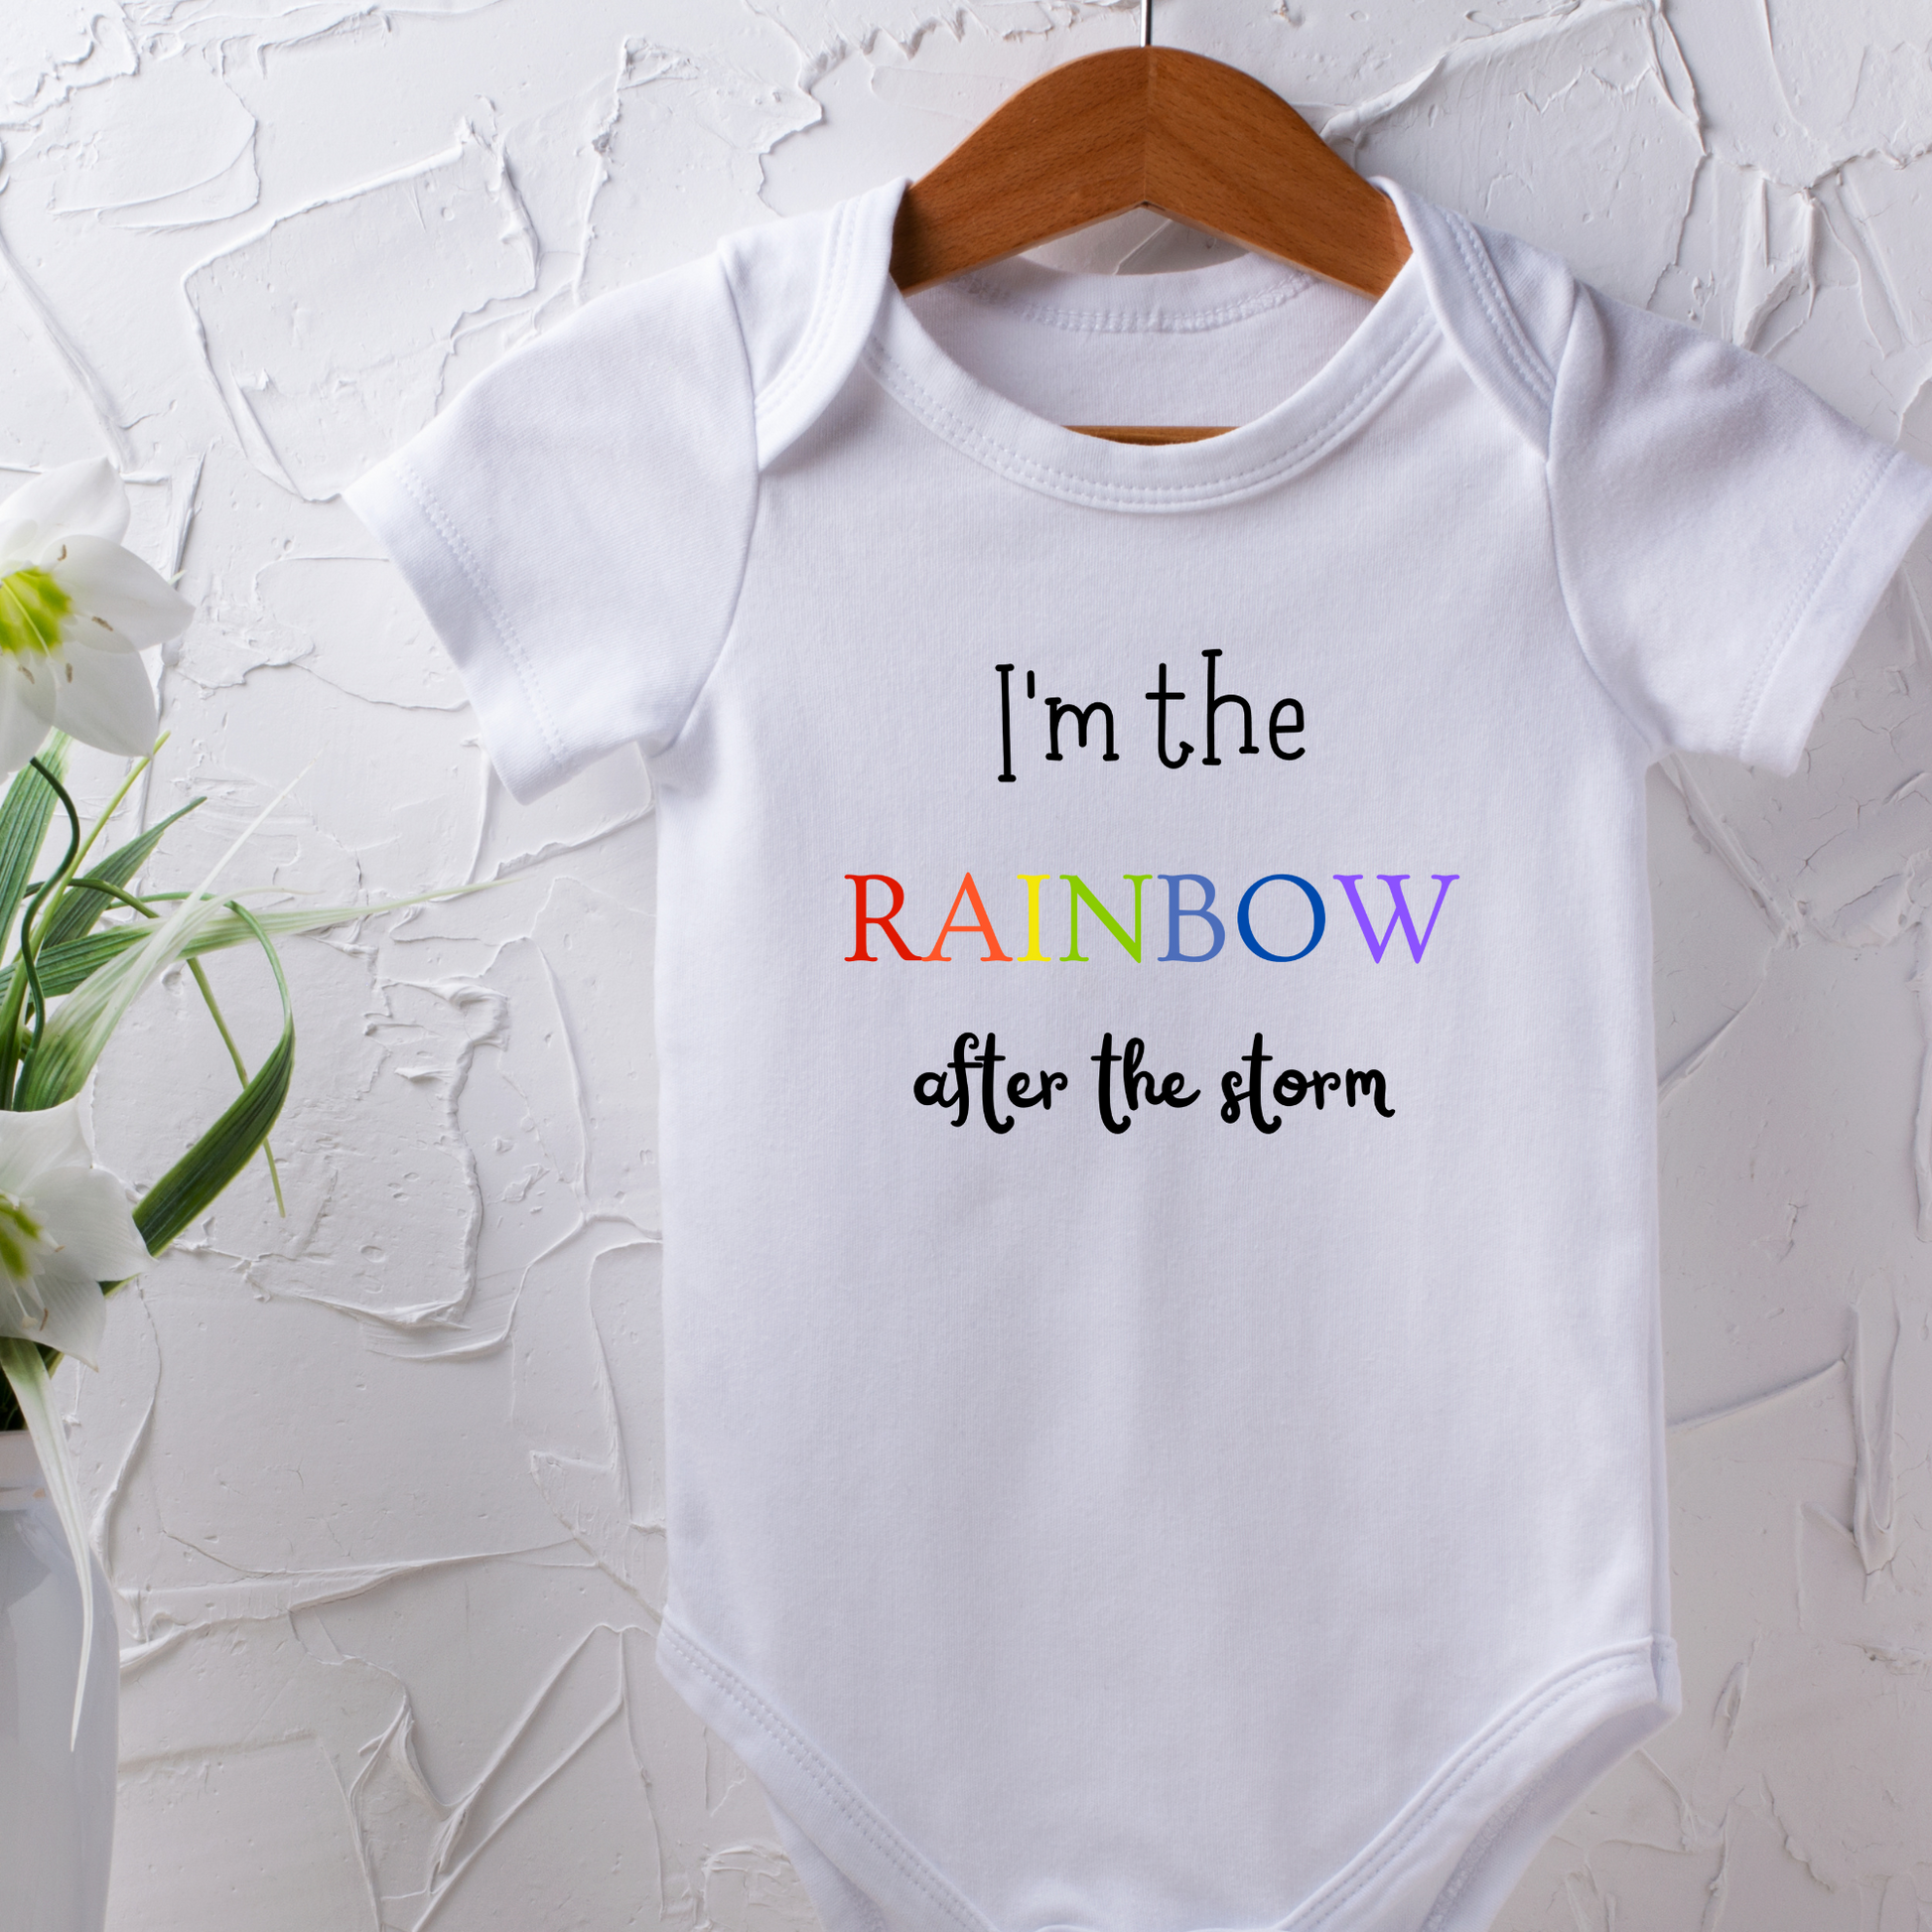 I'm the Rainbow after the storm baby outfit, little me newborn and baby clothes, toddler clothing, funny shirt, funny baby outfit, newborn babies, personalized baby outfit, personalized onesie, baby bodysuit, pregnancy announcement, babyshower announcement, social media pregnancy announcement, miracle baby outfit